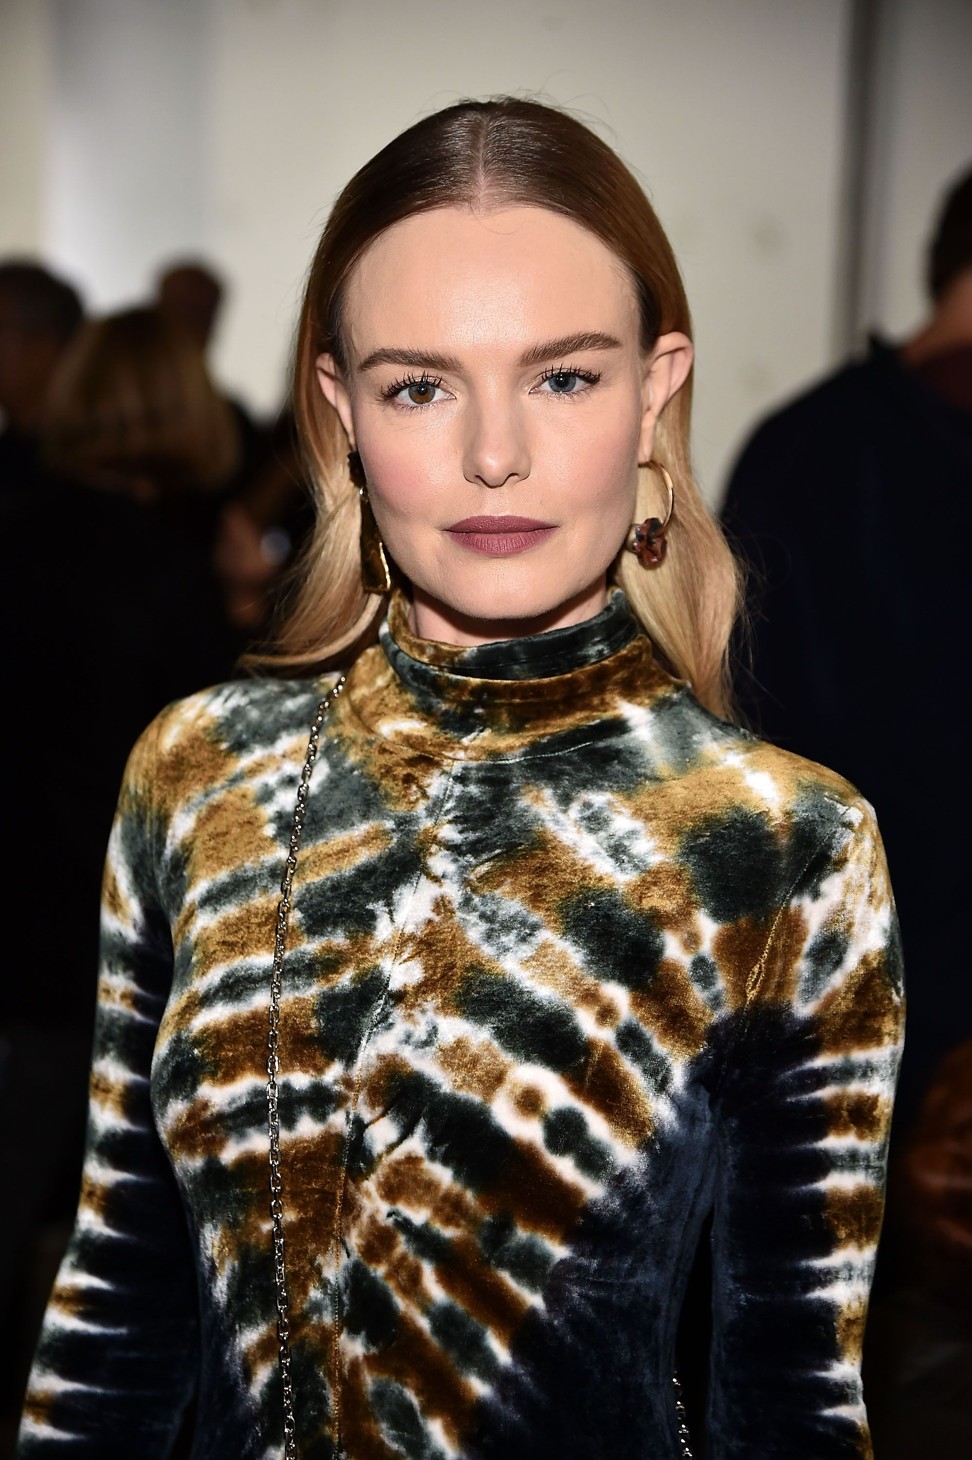 Actress and model Kate Bosworth joined the front row at the Proenza Schouler collection. Photo: Getty Images/AFP